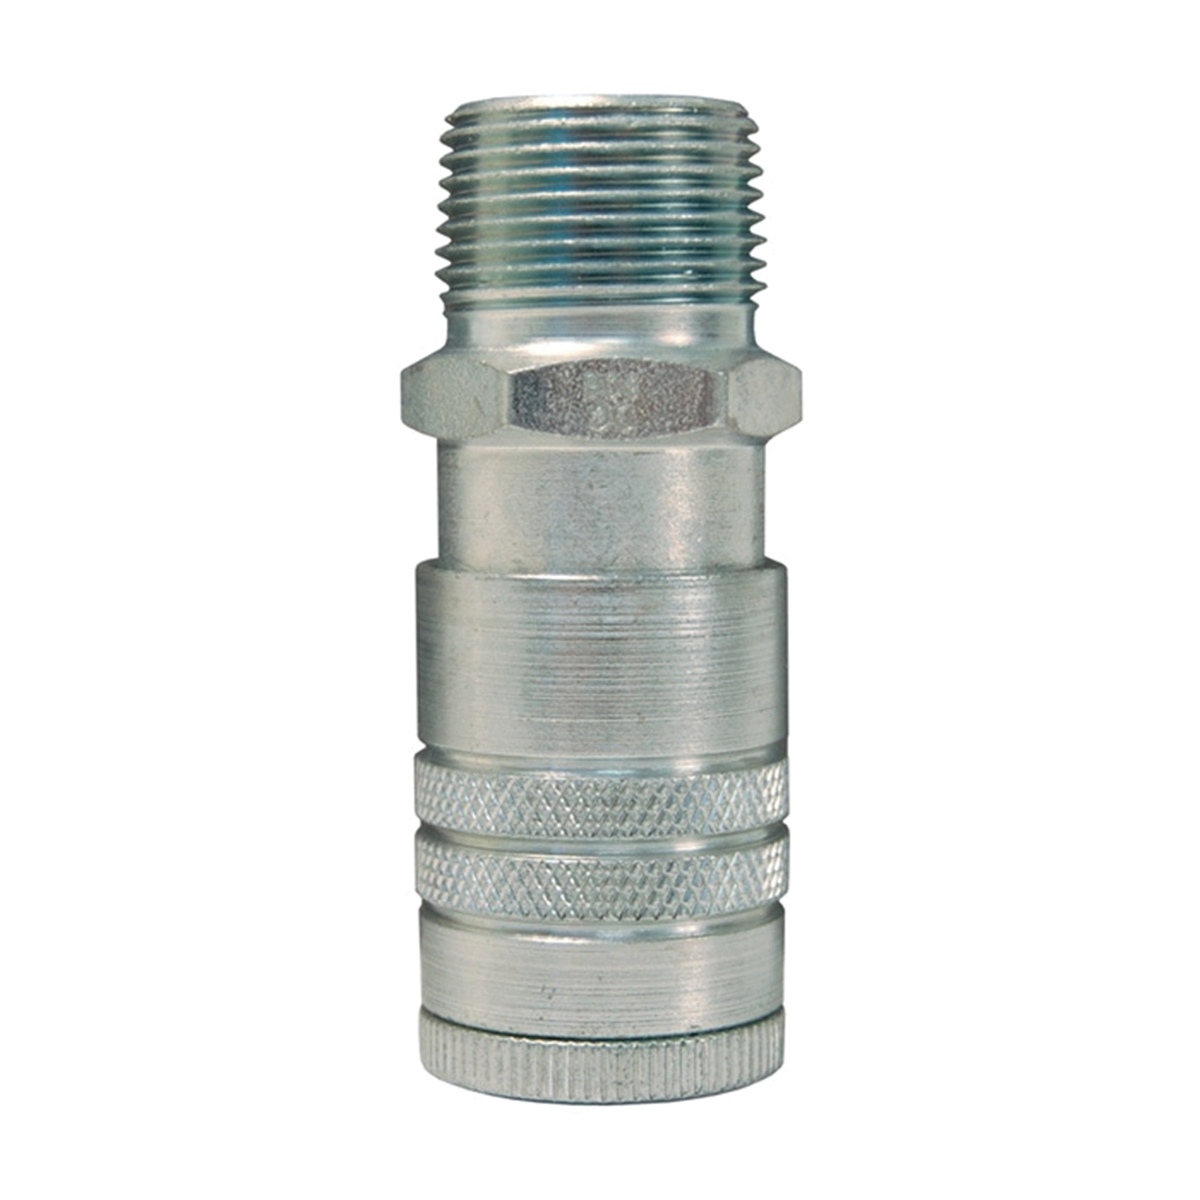 Pneumatic Manual Coupling, 3/8 in x 1/2-14 Fitting, Quick-Disconnect Coupler x MNPTF Connection, 500 psi Pressure